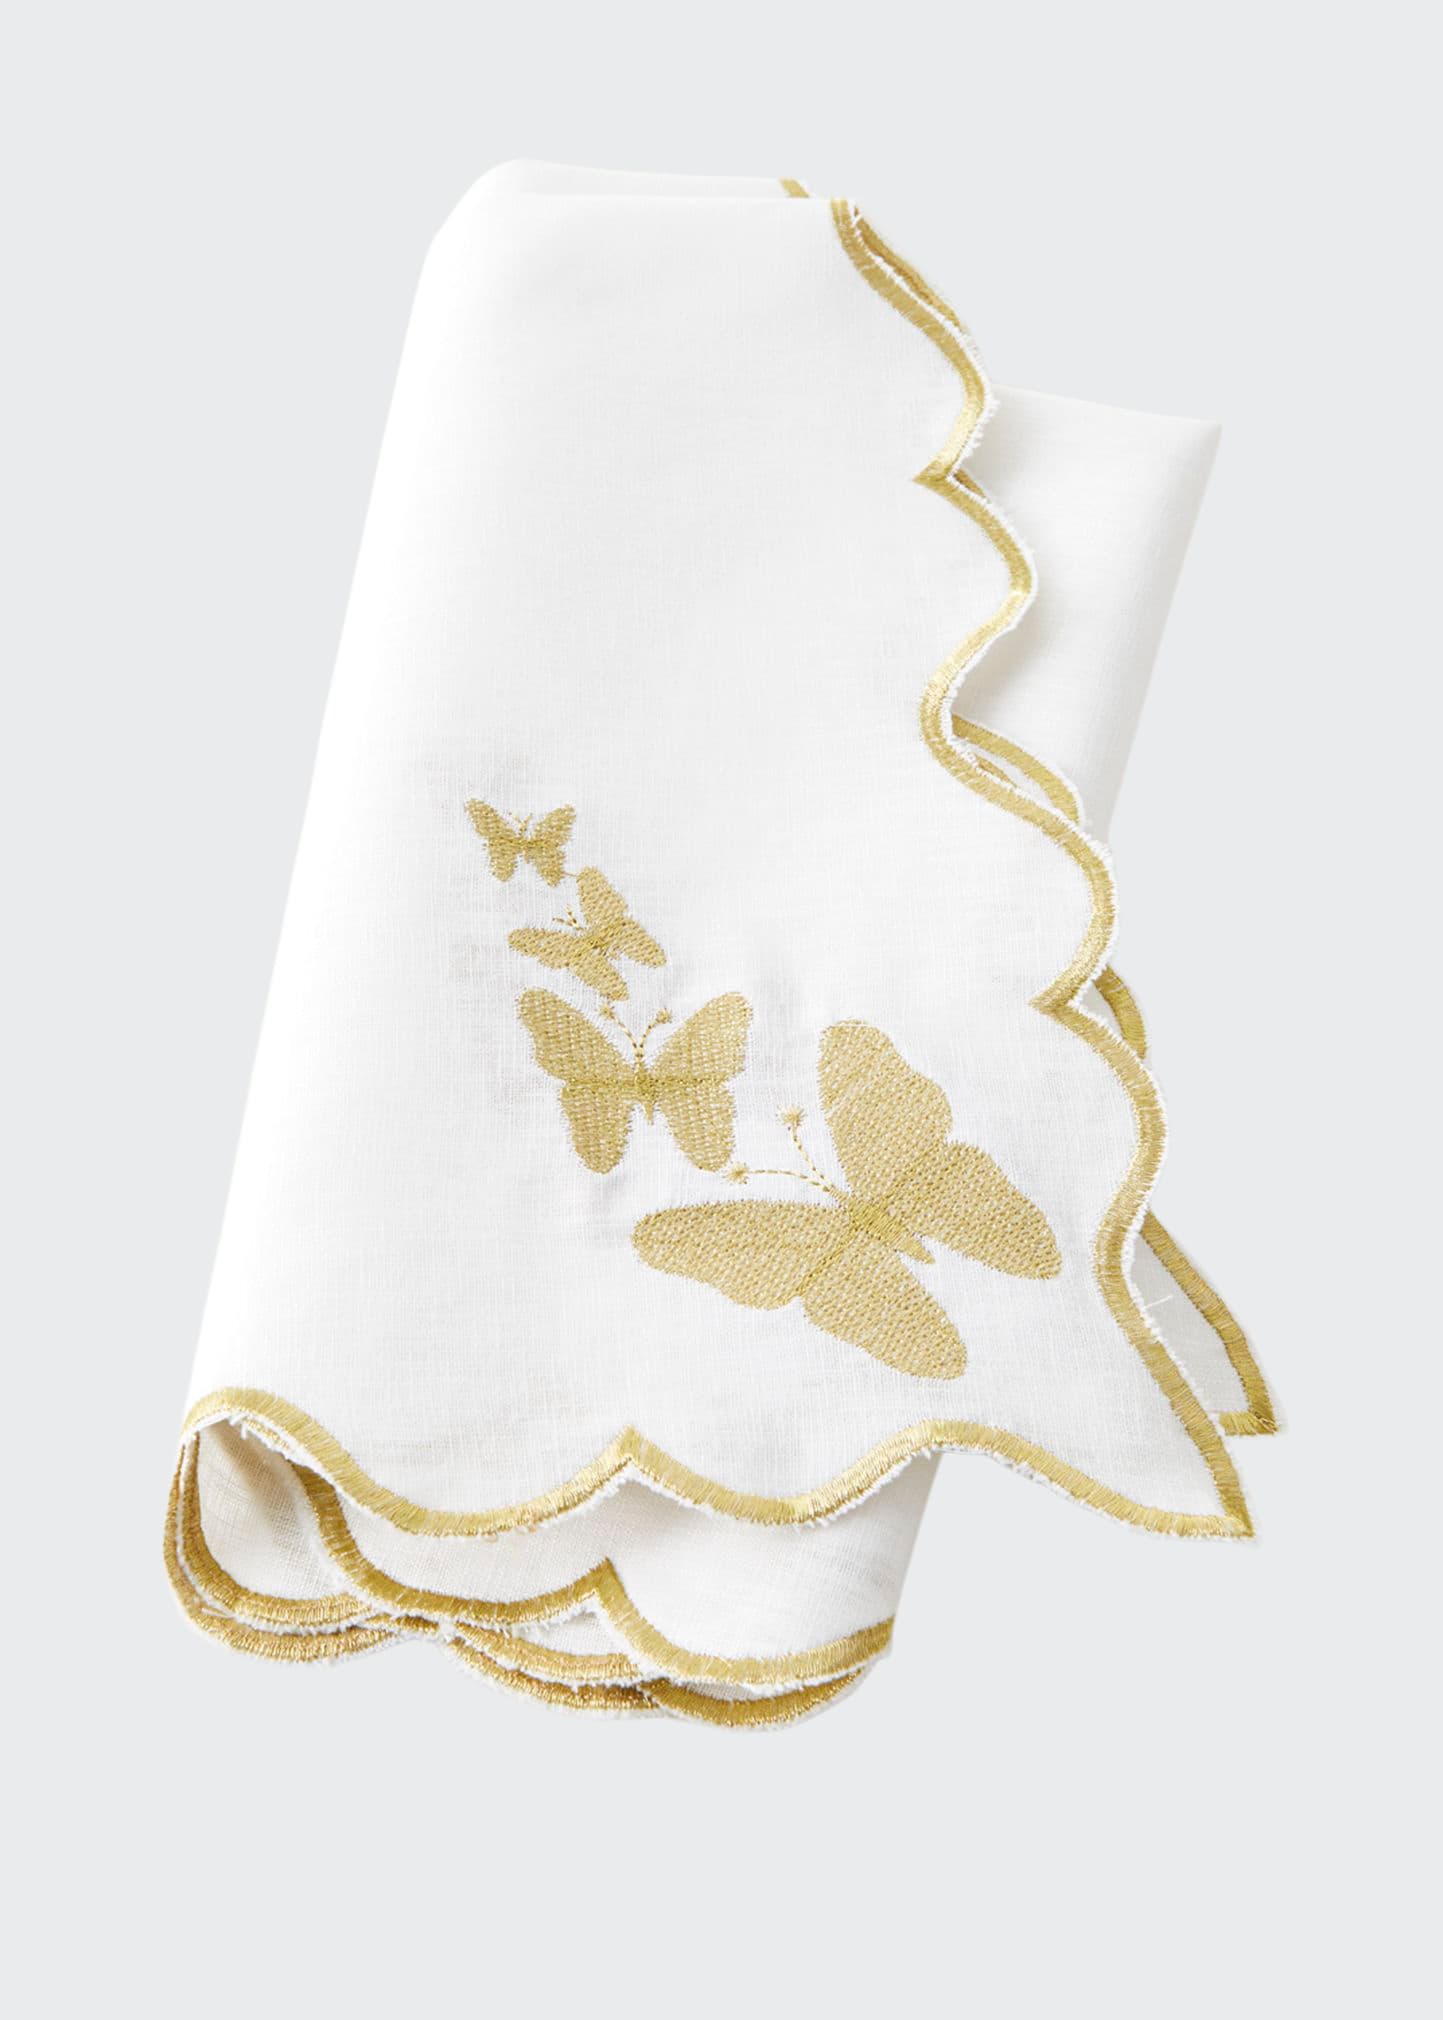 Nomi K White Linen Butterfly Gold Embroidery Napkin, 24"sq. In Blue